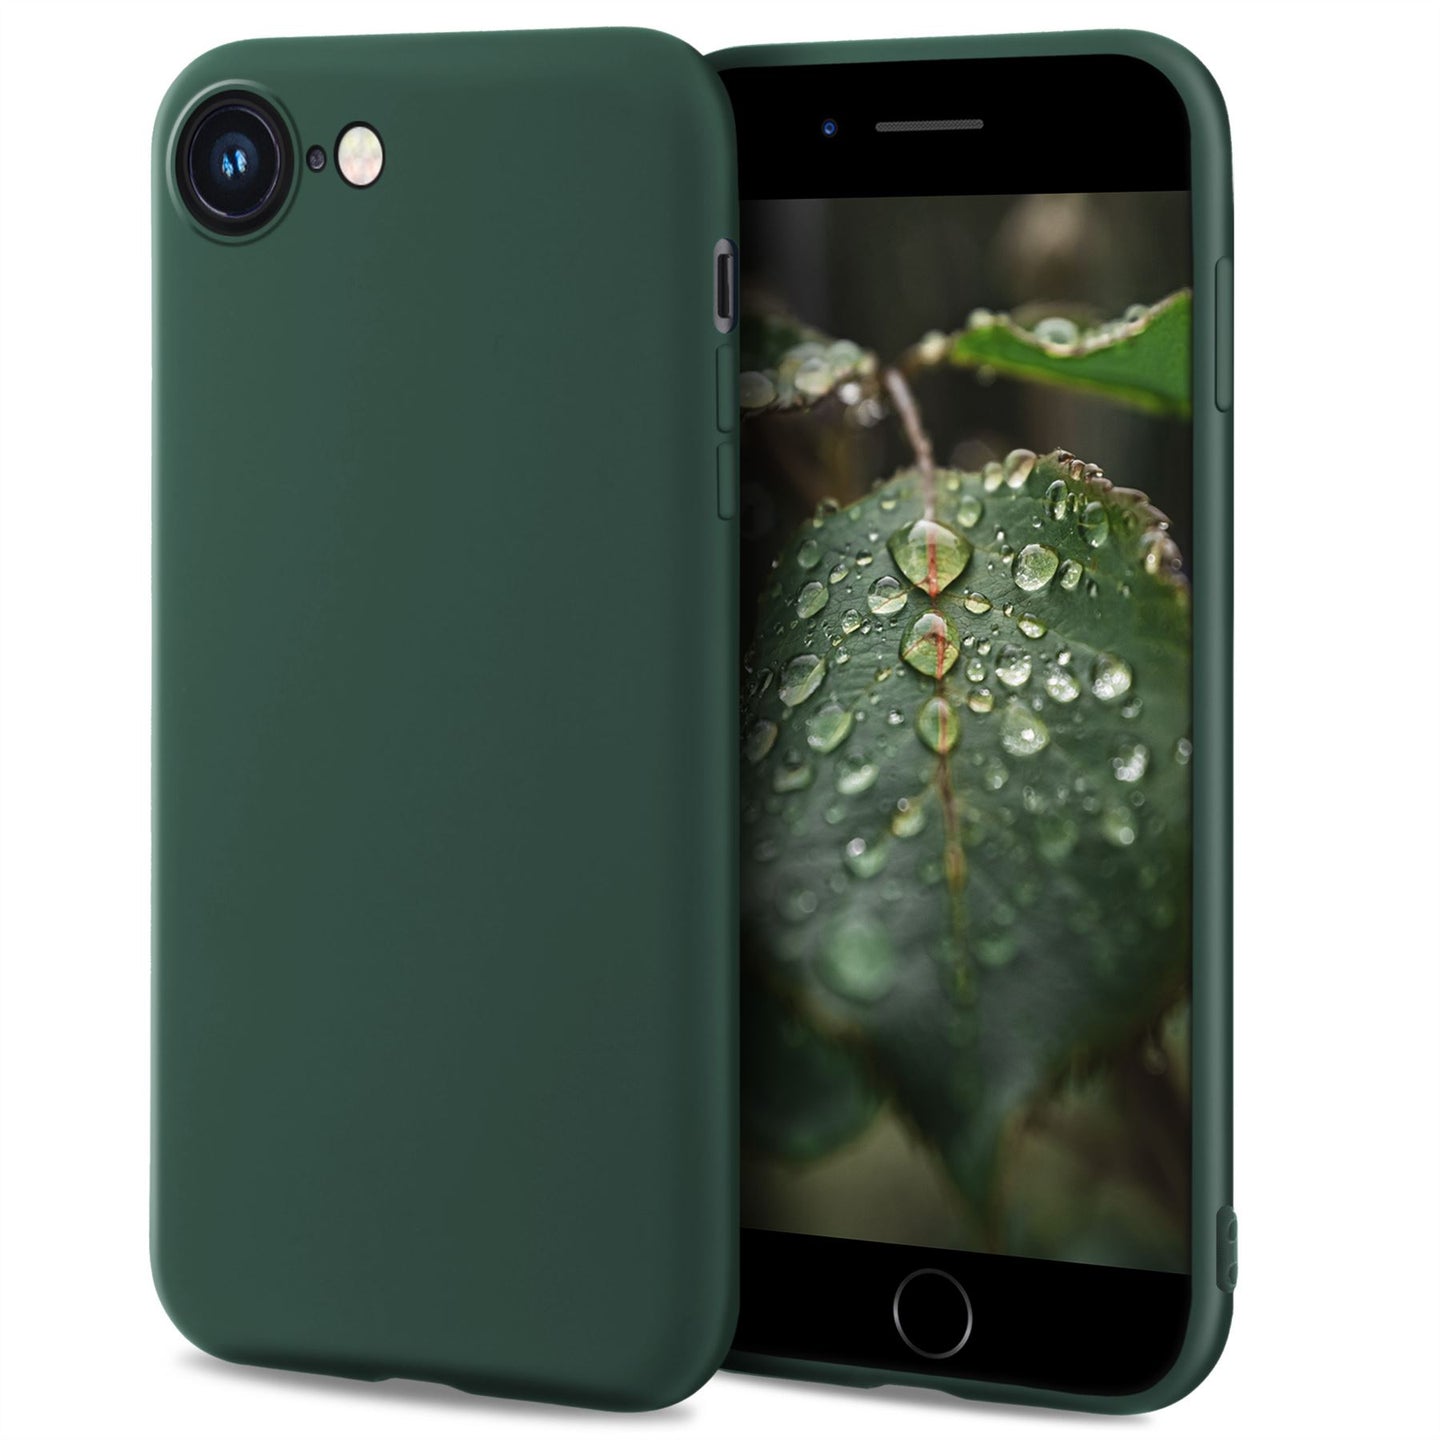 Moozy Lifestyle. Case for iPhone SE 2020, iPhone 8 and iPhone 7, Dark Green - Liquid Silicone Cover with Matte Finish and Soft Microfiber Lining